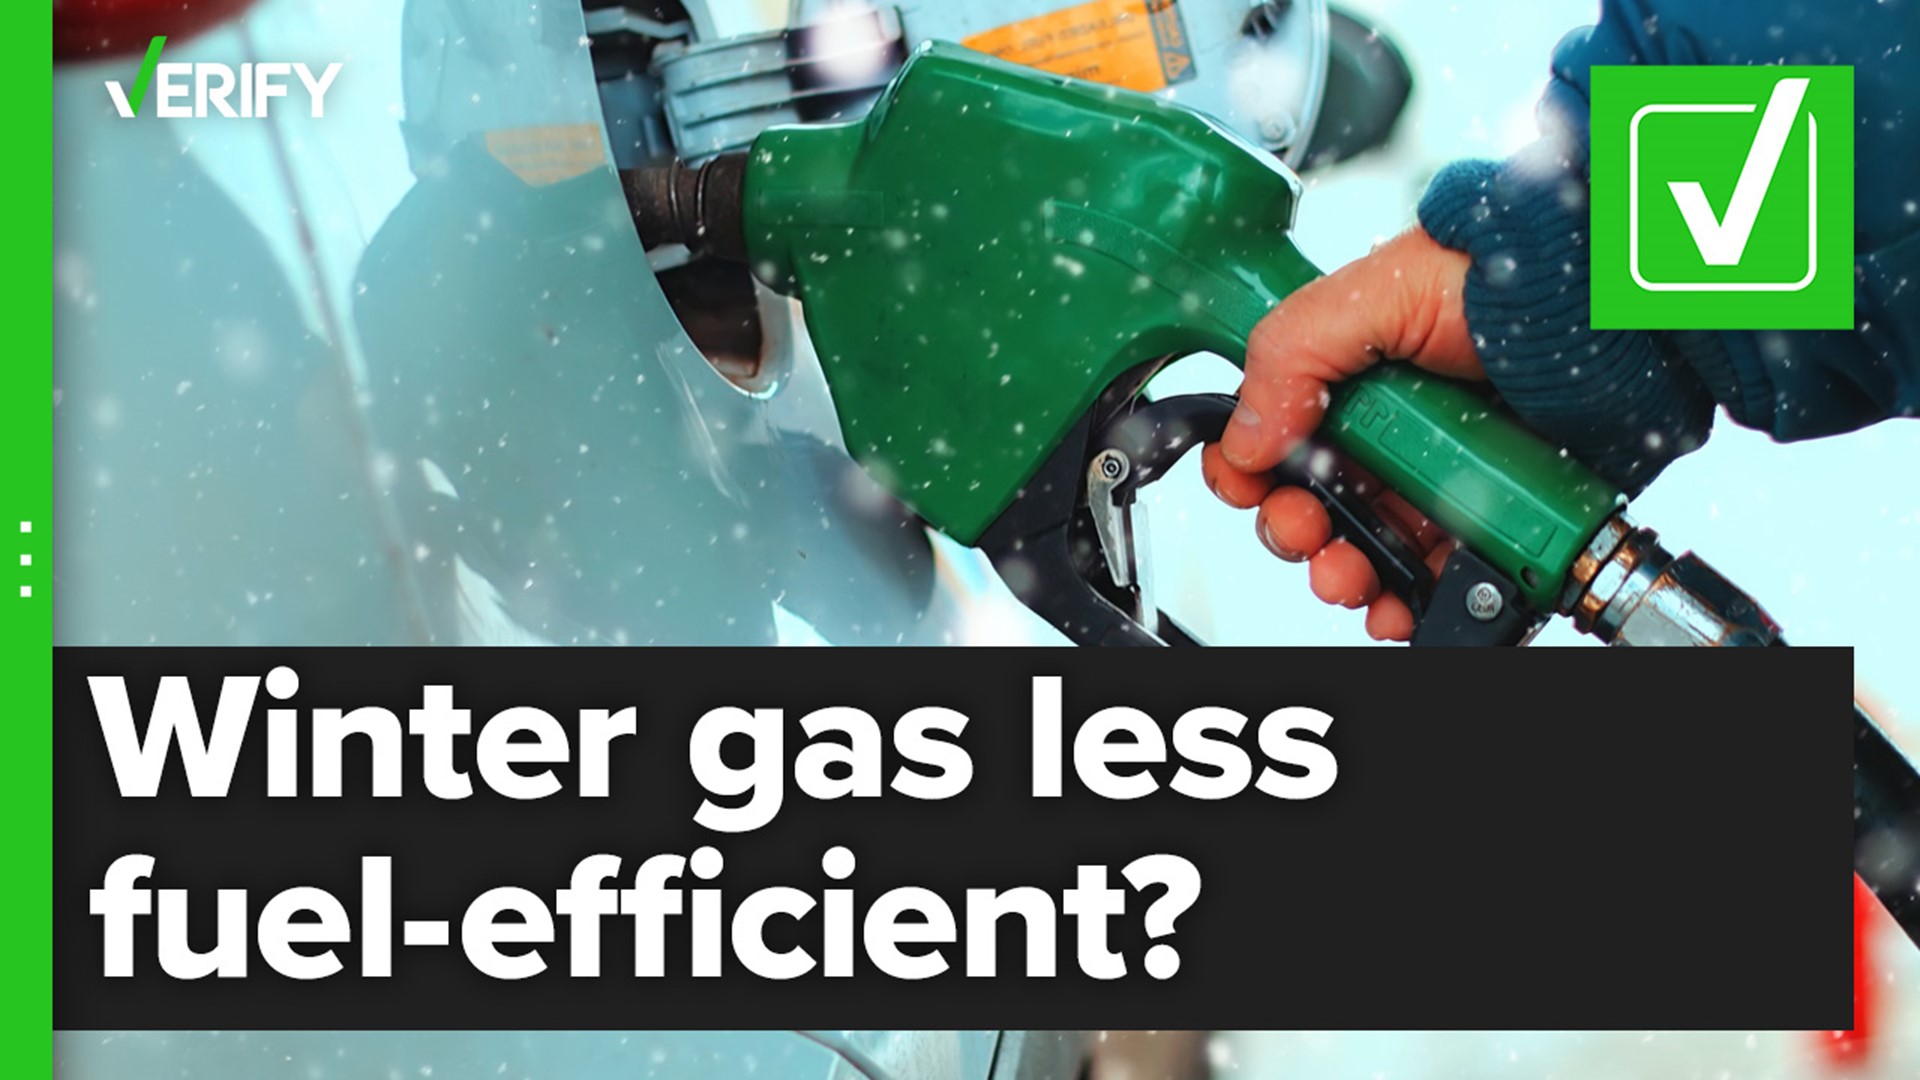 Federal law and seasonal temperatures dictate the type of gas we use in our vehicles during the year. Winter gas is a little less fuel efficient than summer gas.